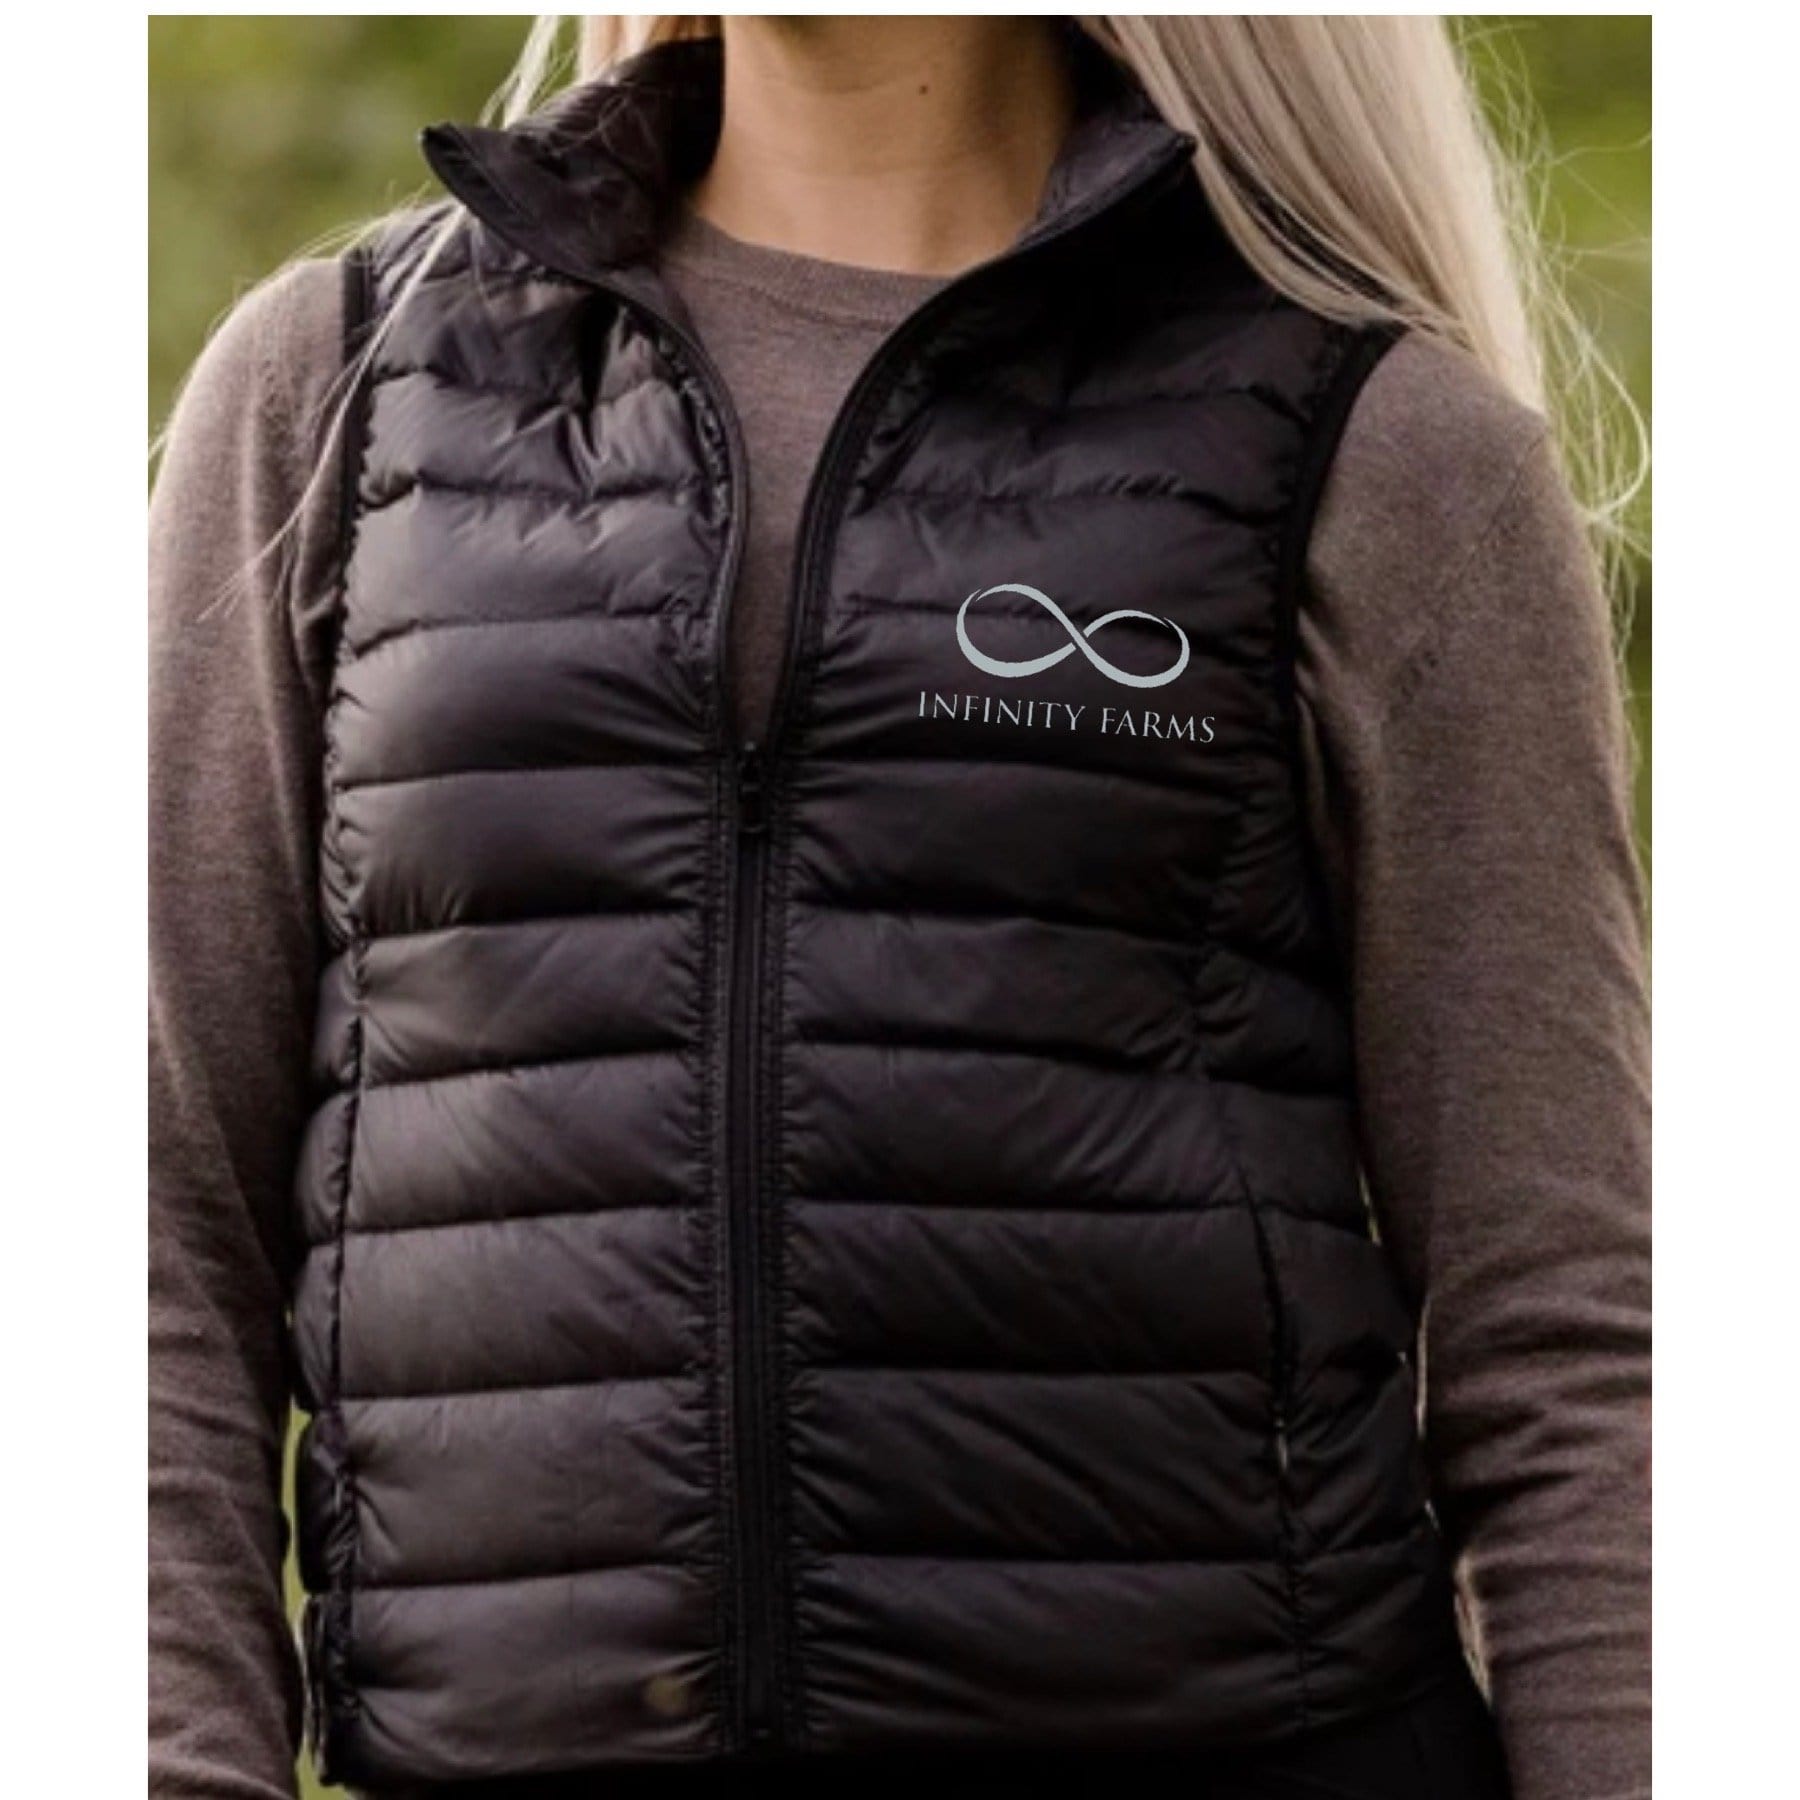 Equestrian Team Apparel Infinity Farms Ladies Puffy Vest equestrian team apparel online tack store mobile tack store custom farm apparel custom show stable clothing equestrian lifestyle horse show clothing riding clothes horses equestrian tack store